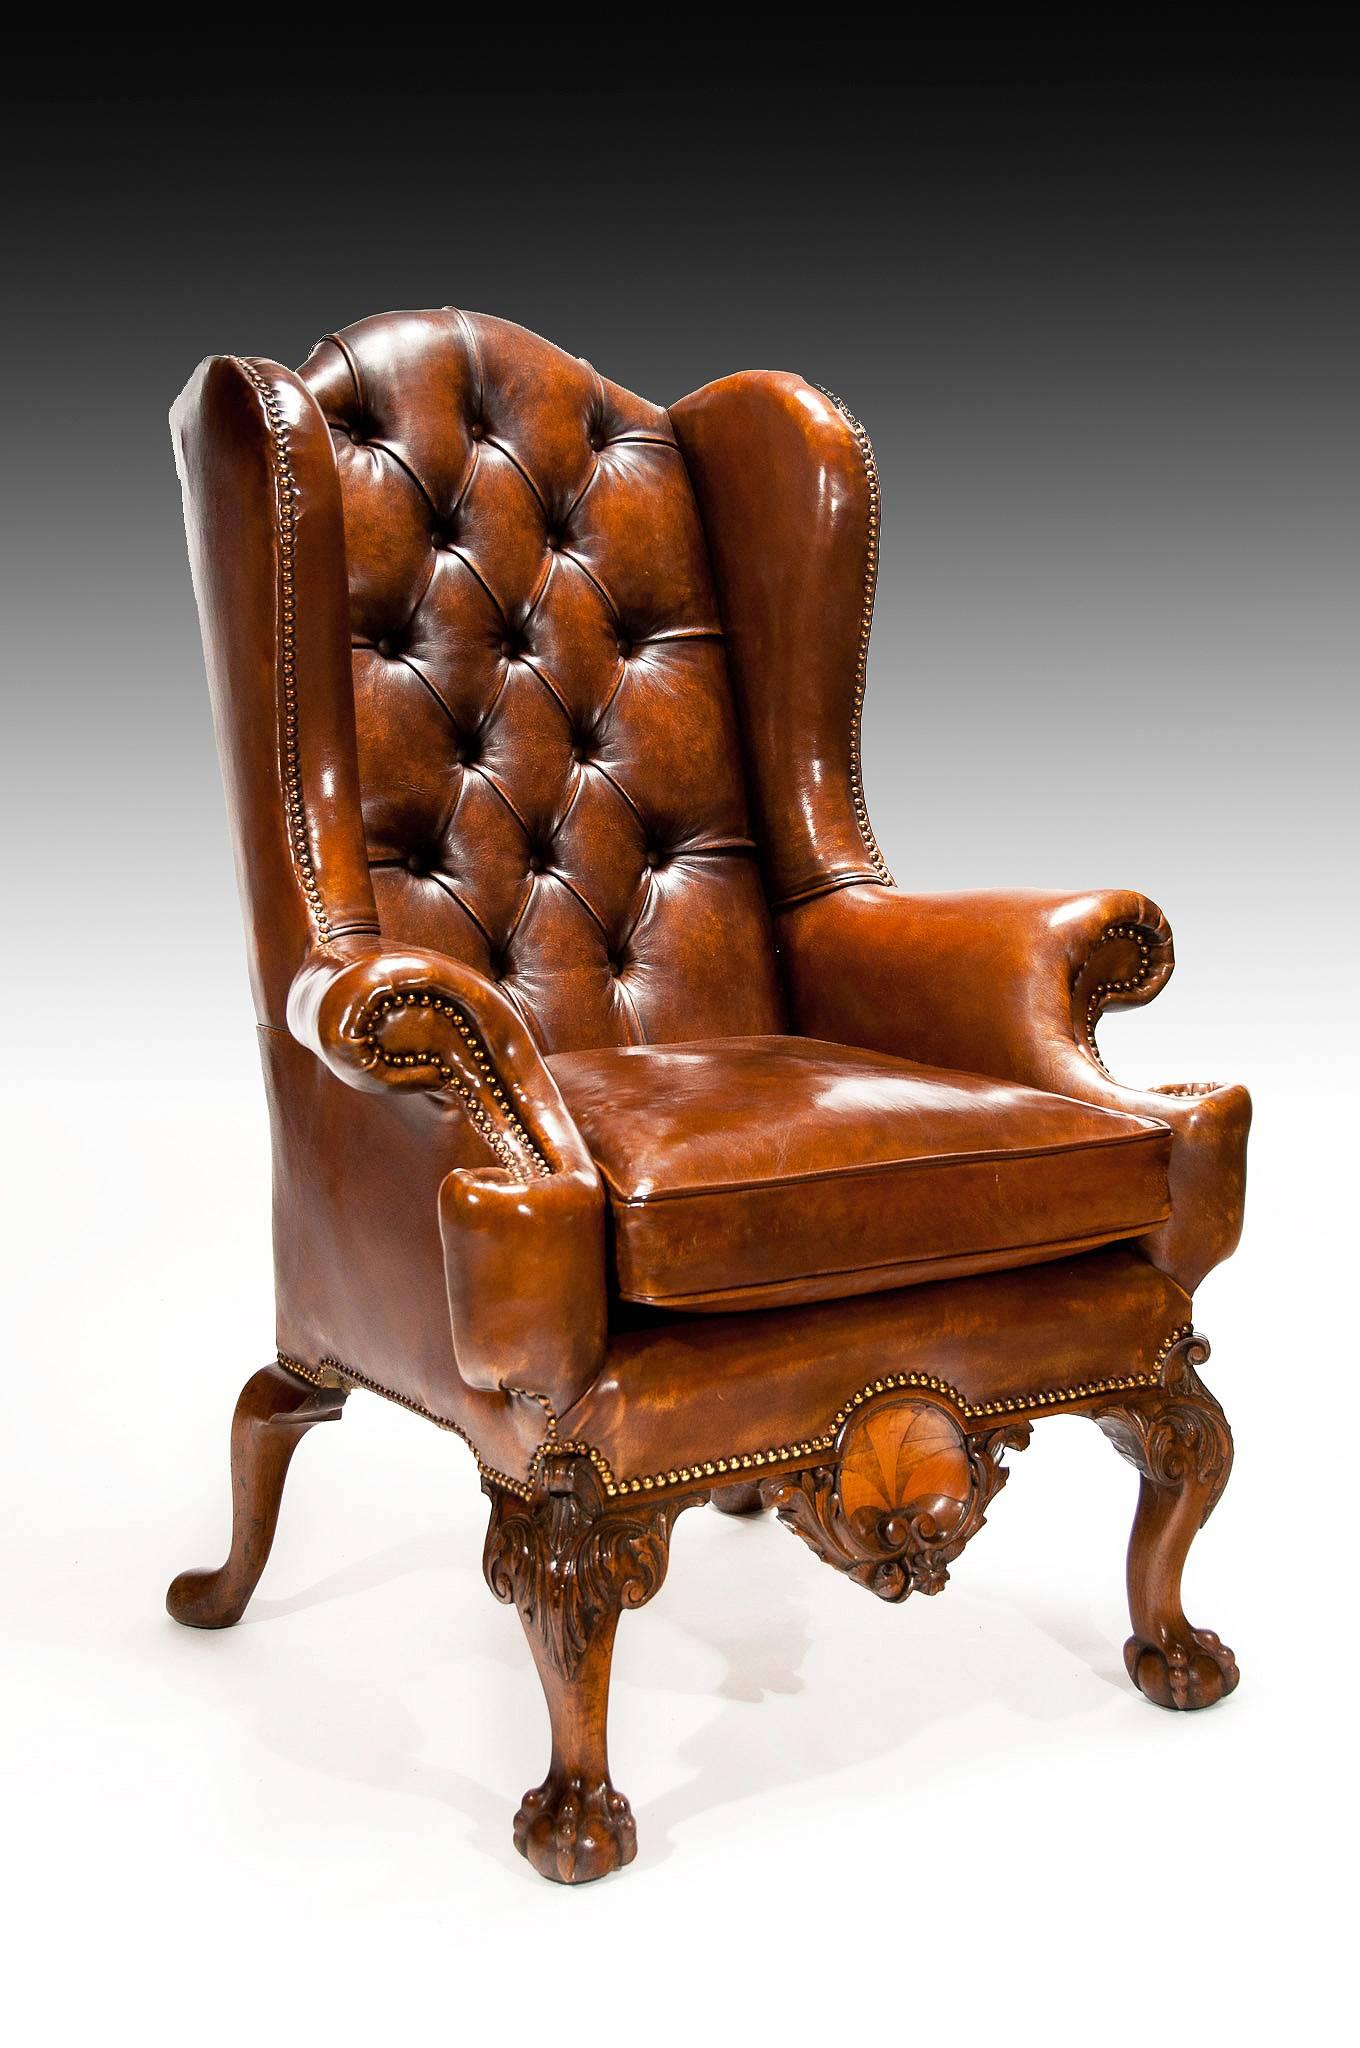 An exceptional 19th Century walnut leather upholstered wing back armchair of excellent shape and proportions.

The deep buttoned leather upholstered back having a serpentine shaped top flanked by out swept winged sides which concave inwards to